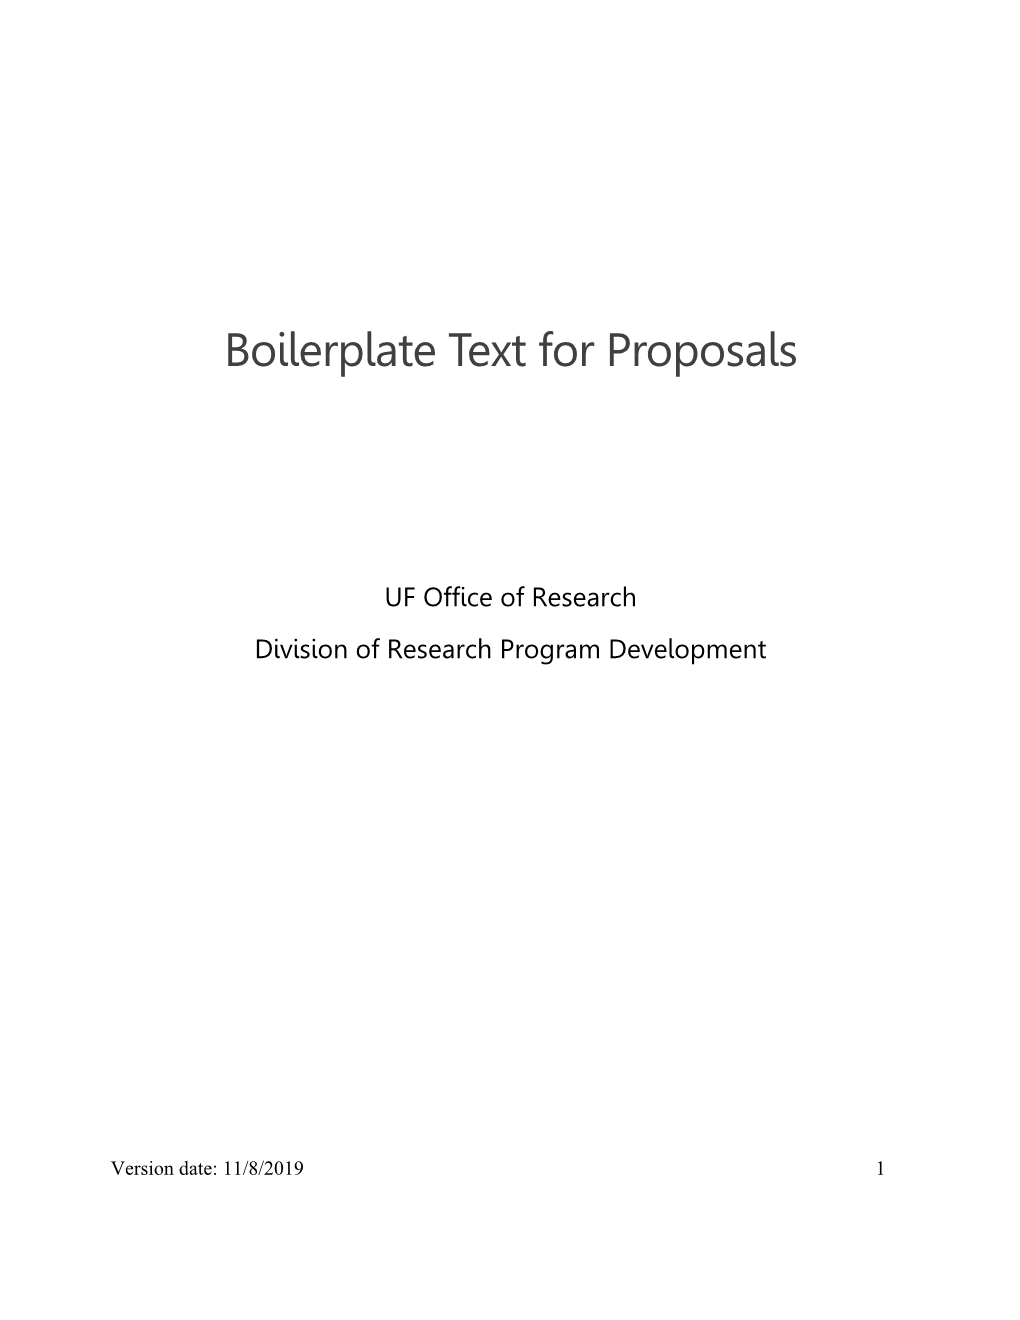 Boilerplate Text for Proposals (Pdf)